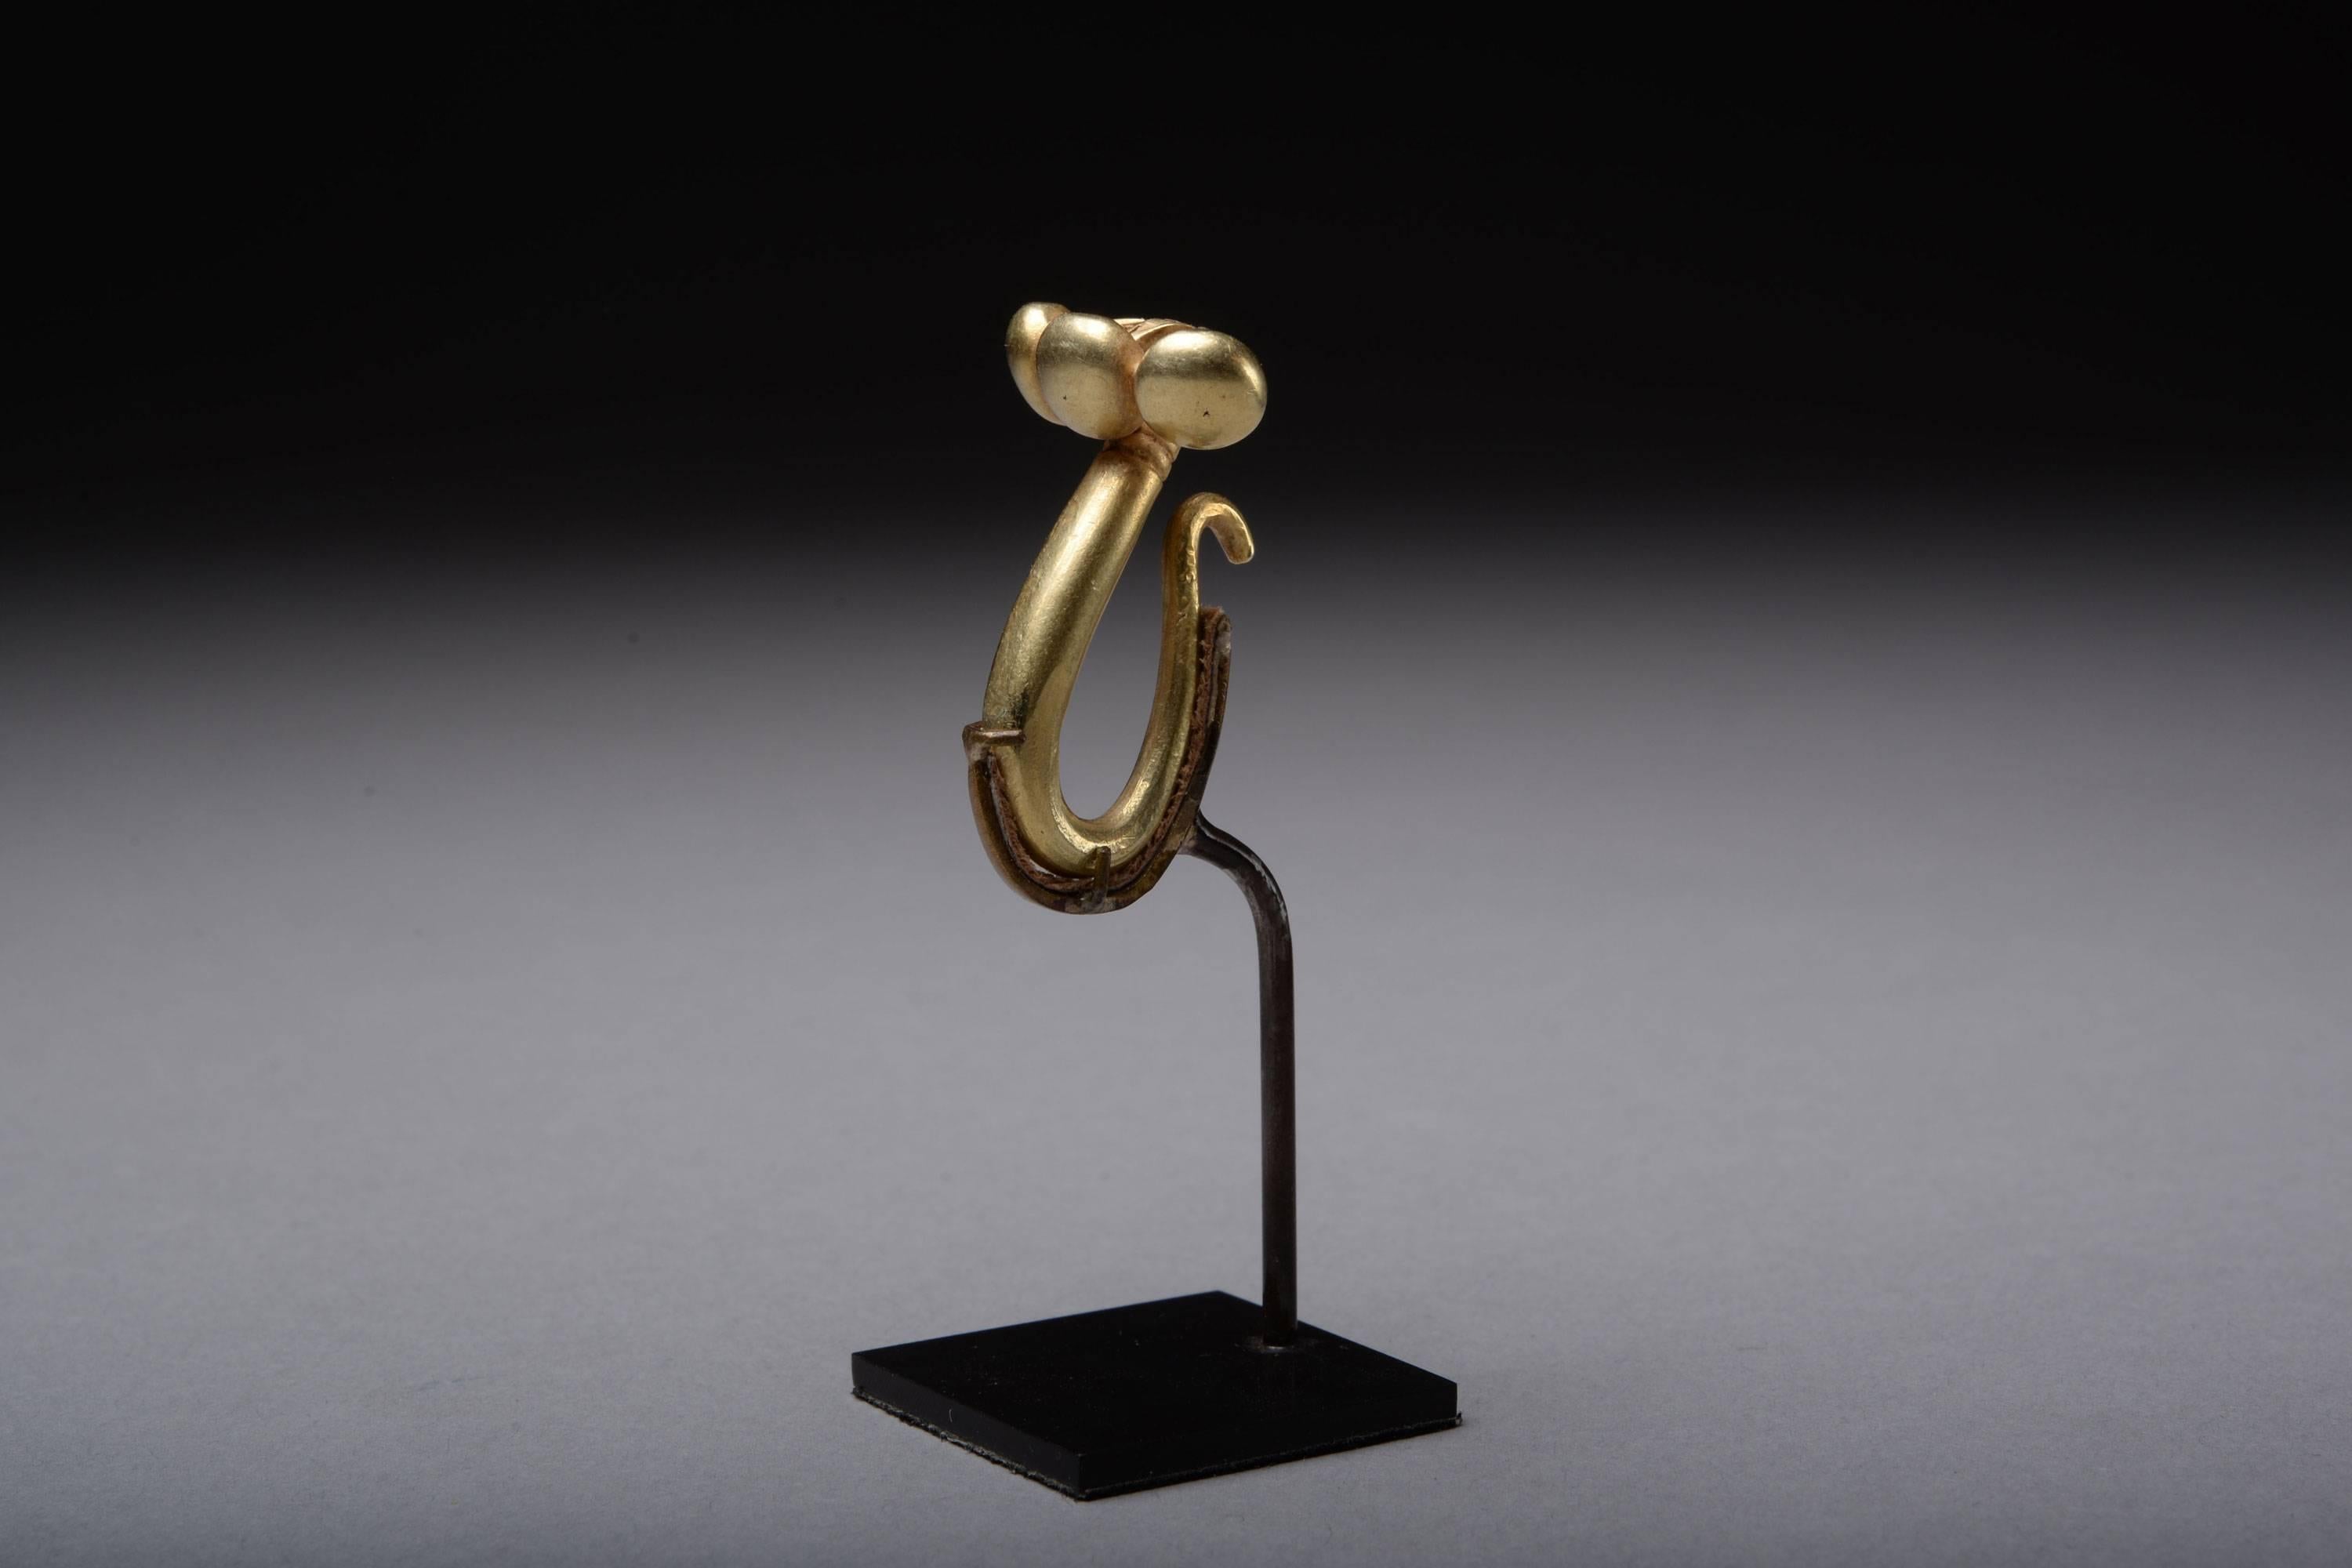 An ancient Greek solid gold dress fastener, dating to the 6th Century BC.

A most unusual brooch-like fastener, which likely functioned as a button in antiquity, drawing together two perforated pieces of fabric by means of the s-shaped loop at the